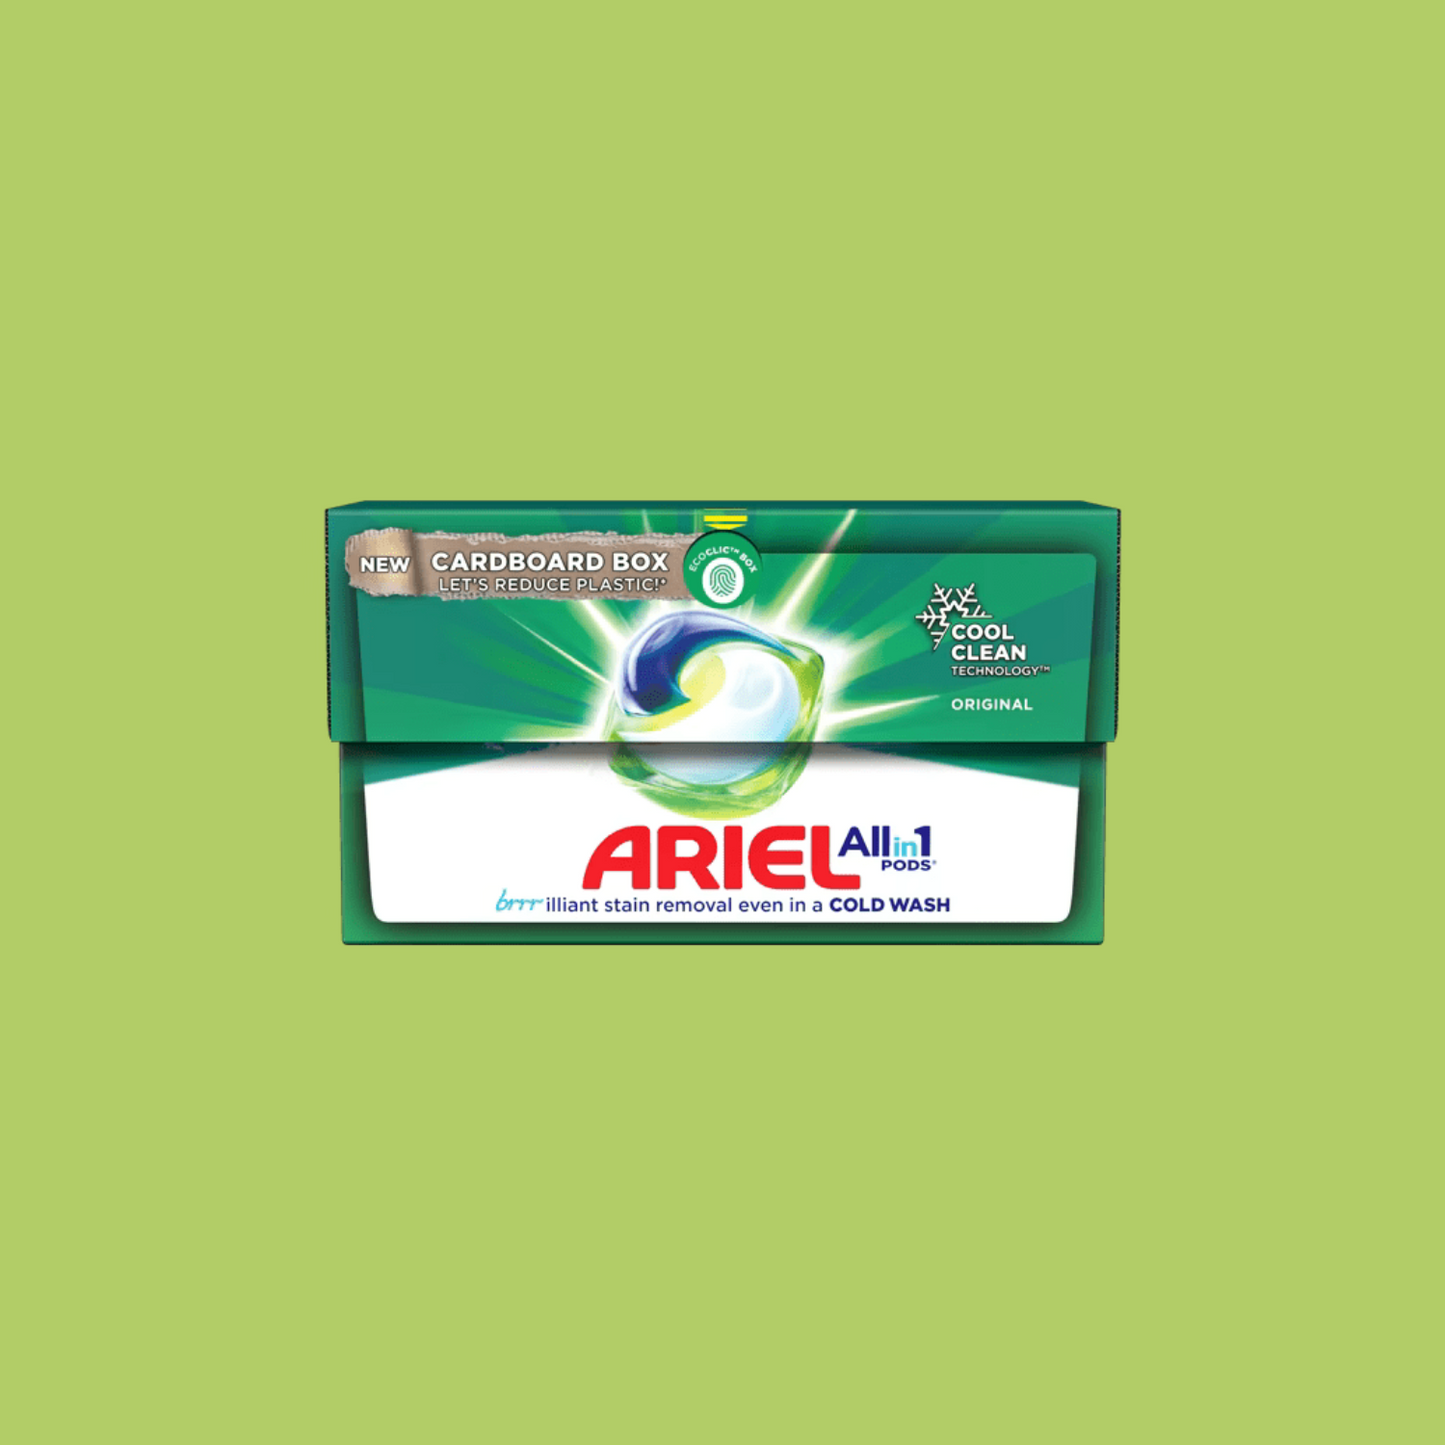 Ariel Original All-in-1 PODS 13 Washes